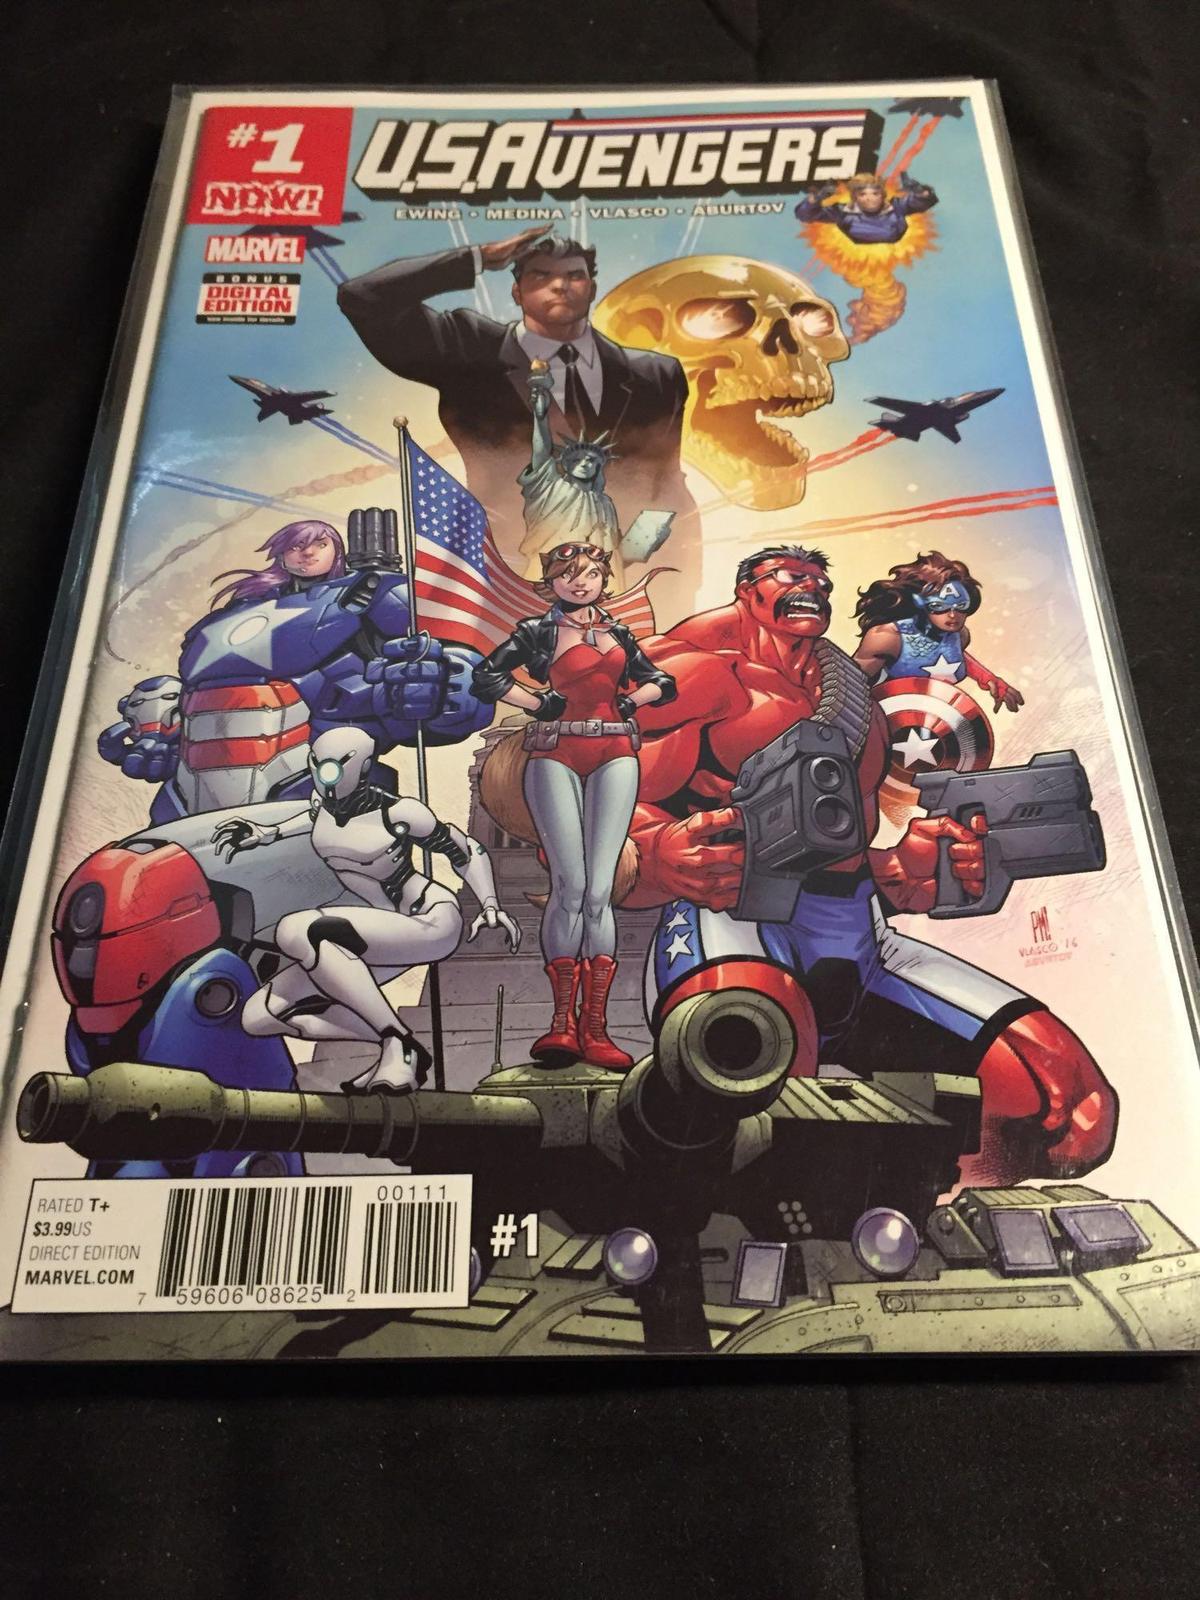 USAvengers #1 Comic Book from Amazing Collection